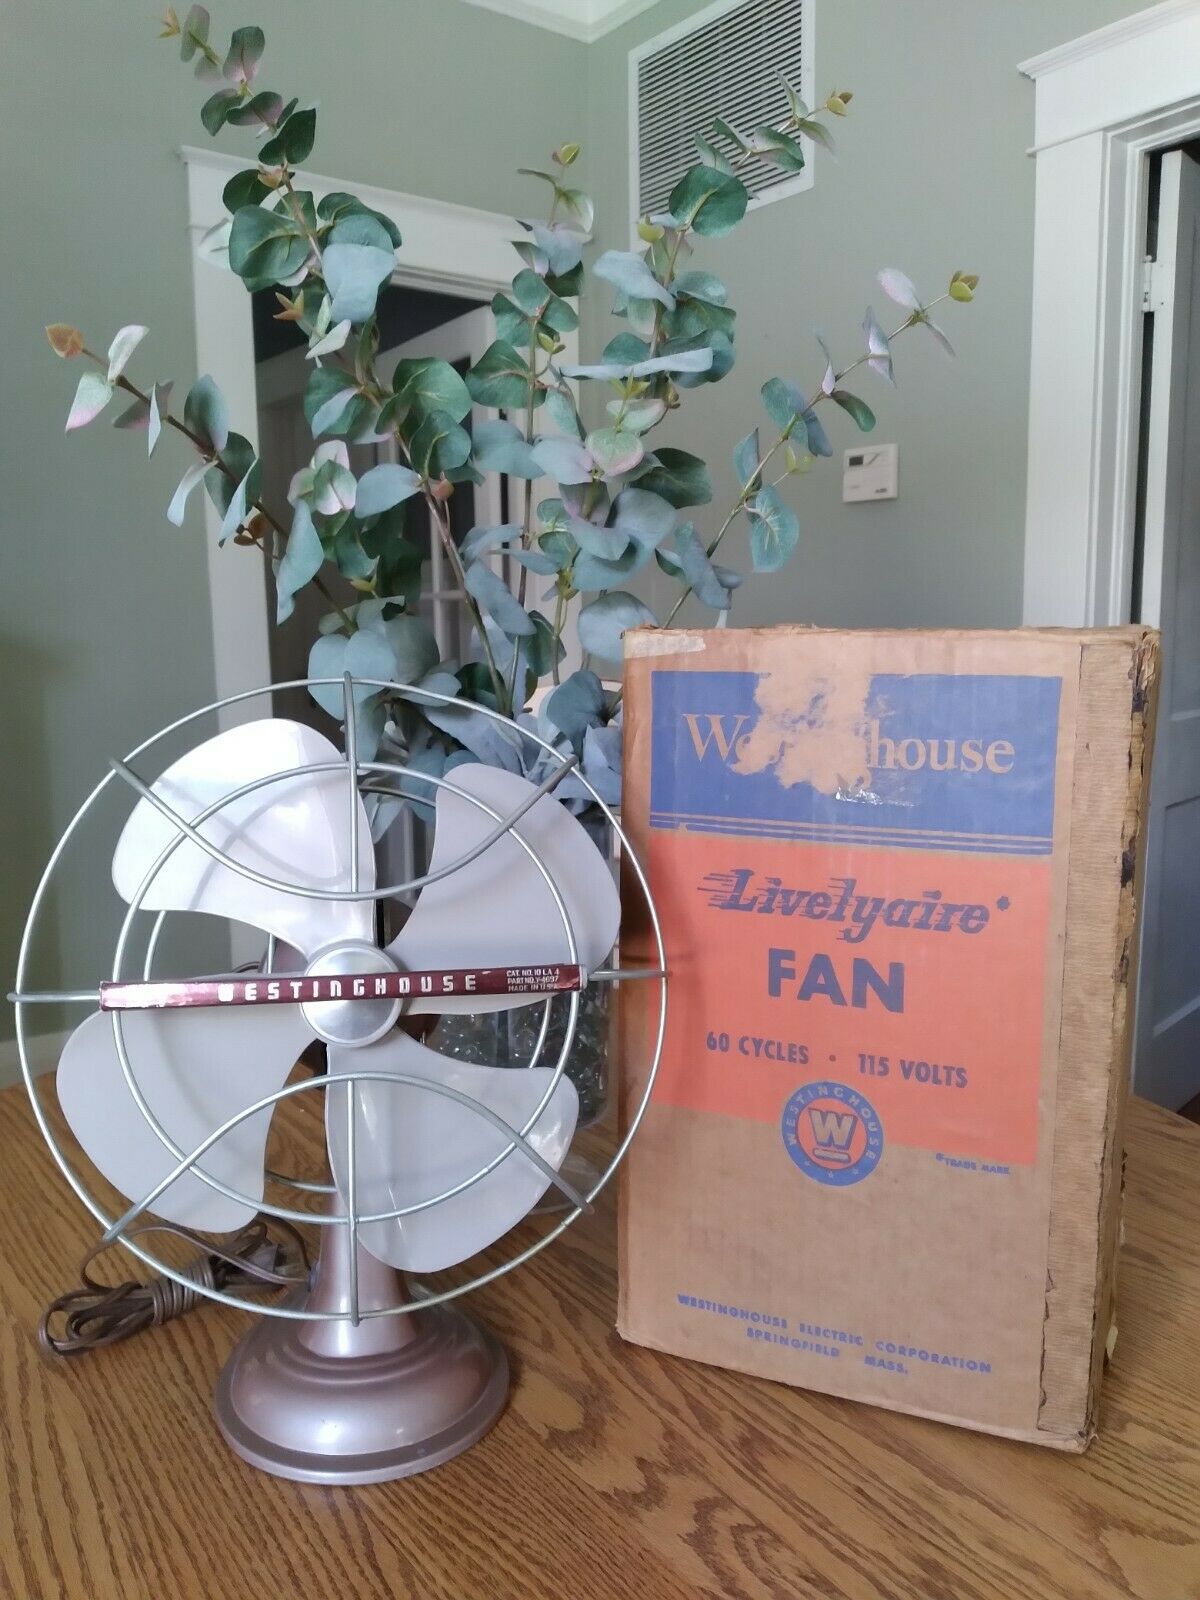 Westinghouse 10" Lively Aire Oscillating Fan #10la4 W/ Original Box ! Dated 1953